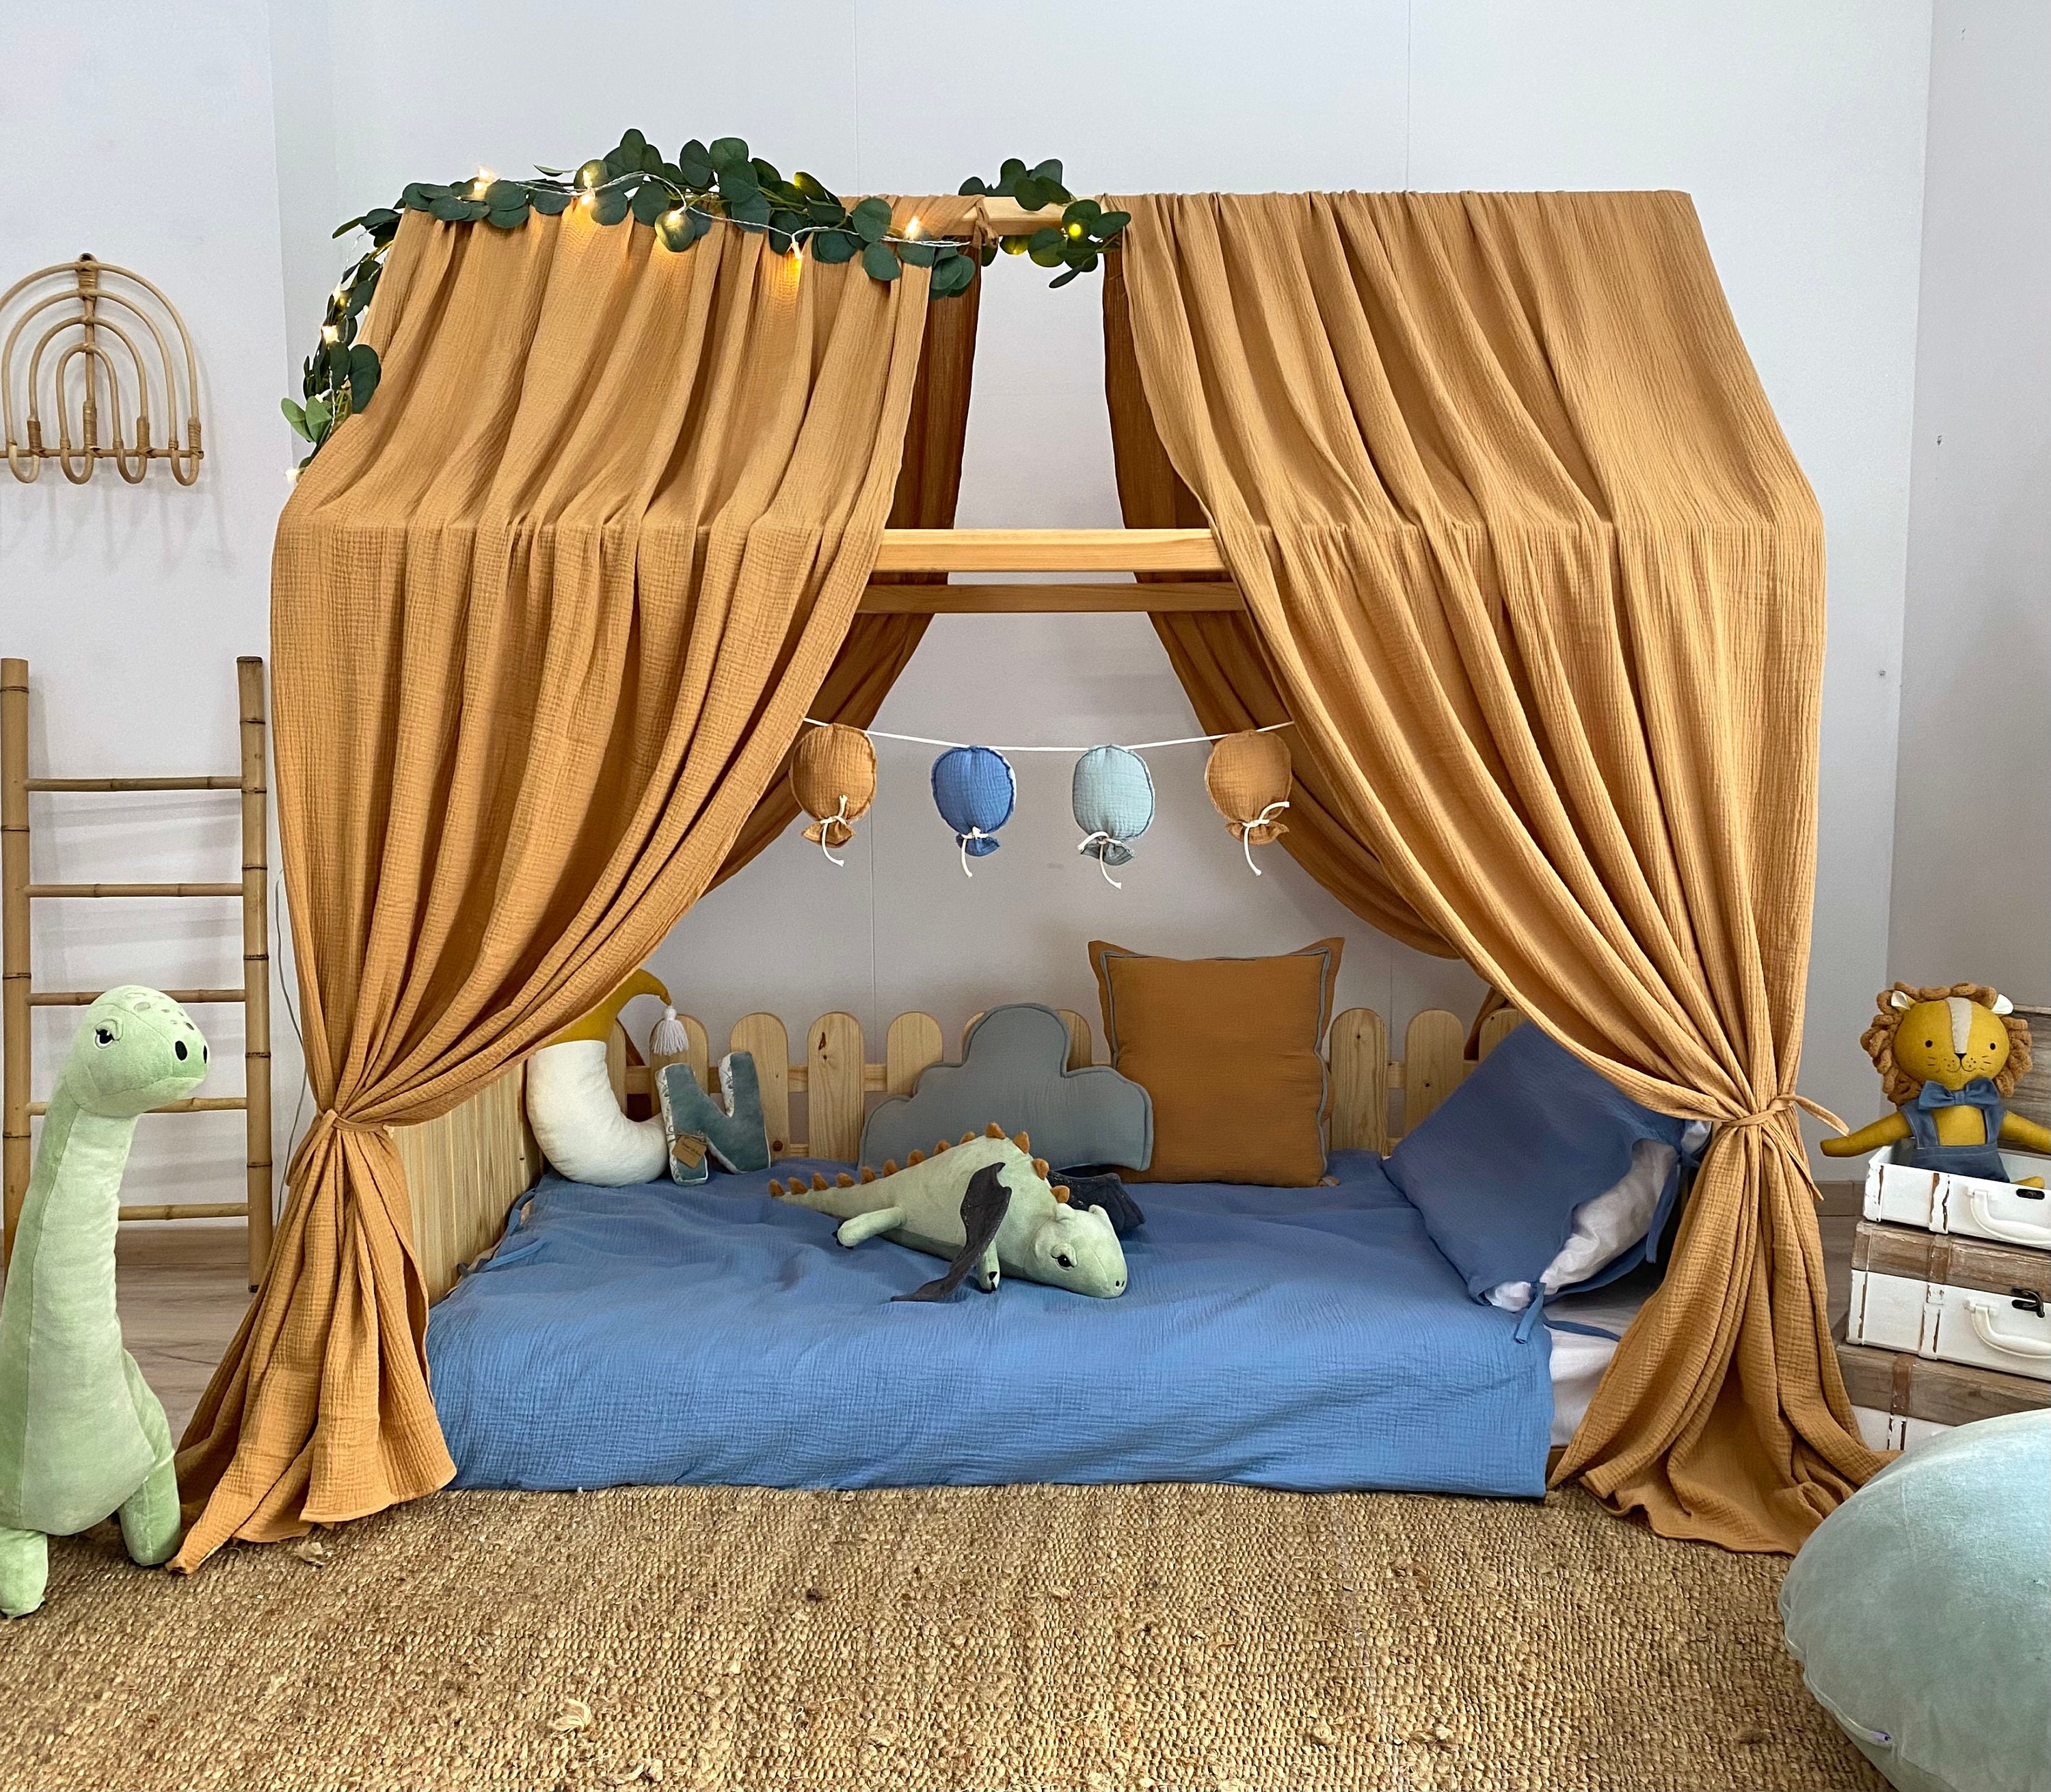 Muslin Canopy Toddler Bed Canopy Playroom Decor Reading Nook